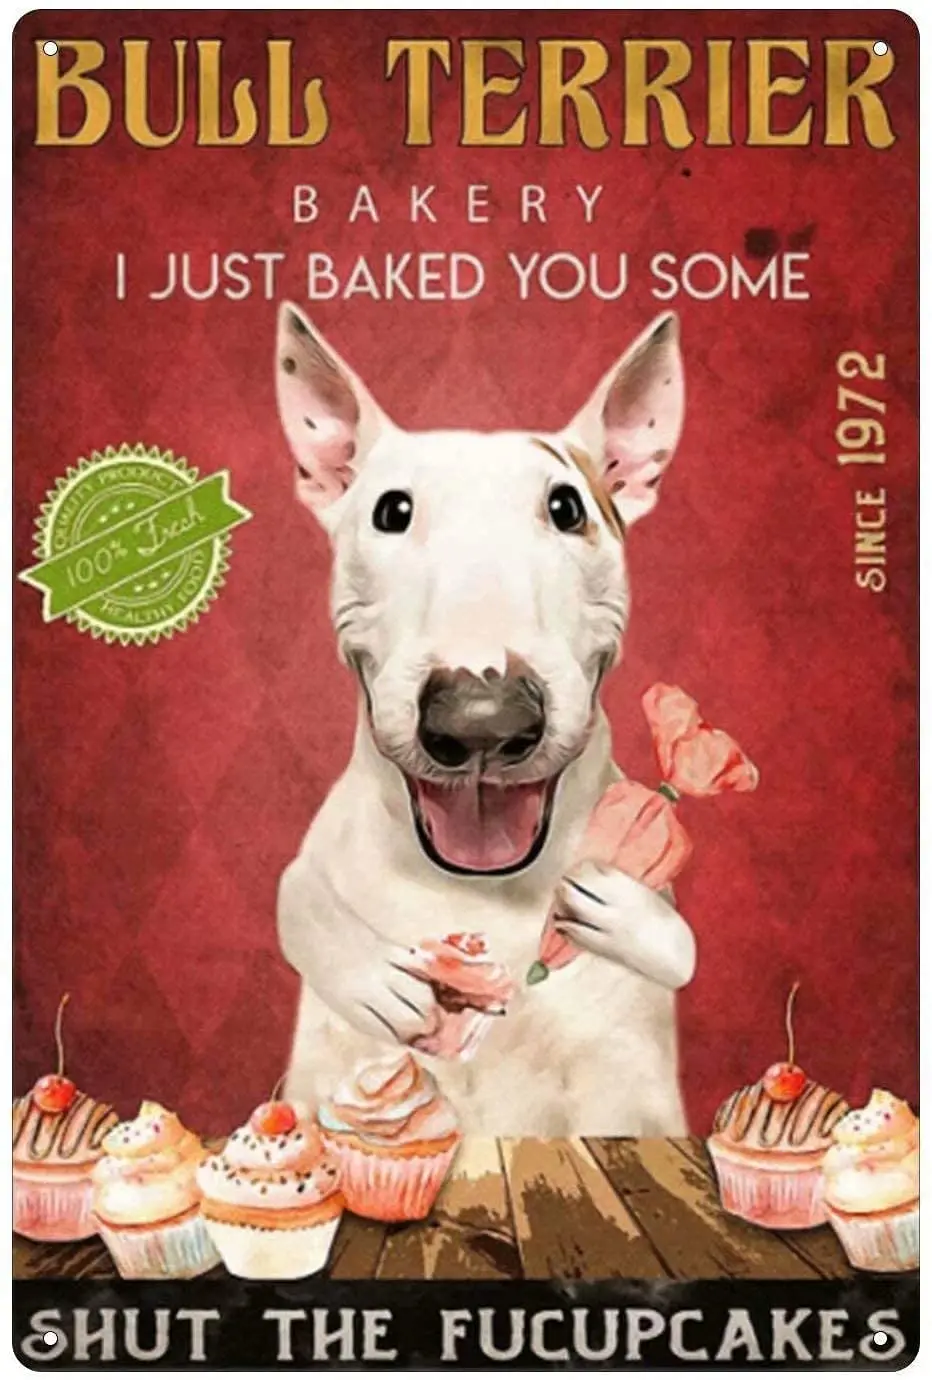 

Funny Dog Metal Tin Sign Bull Terrier Bakery I Just Baked You Some Shut The Fucupcakes Metal Poster Dessert Decoration Plaque